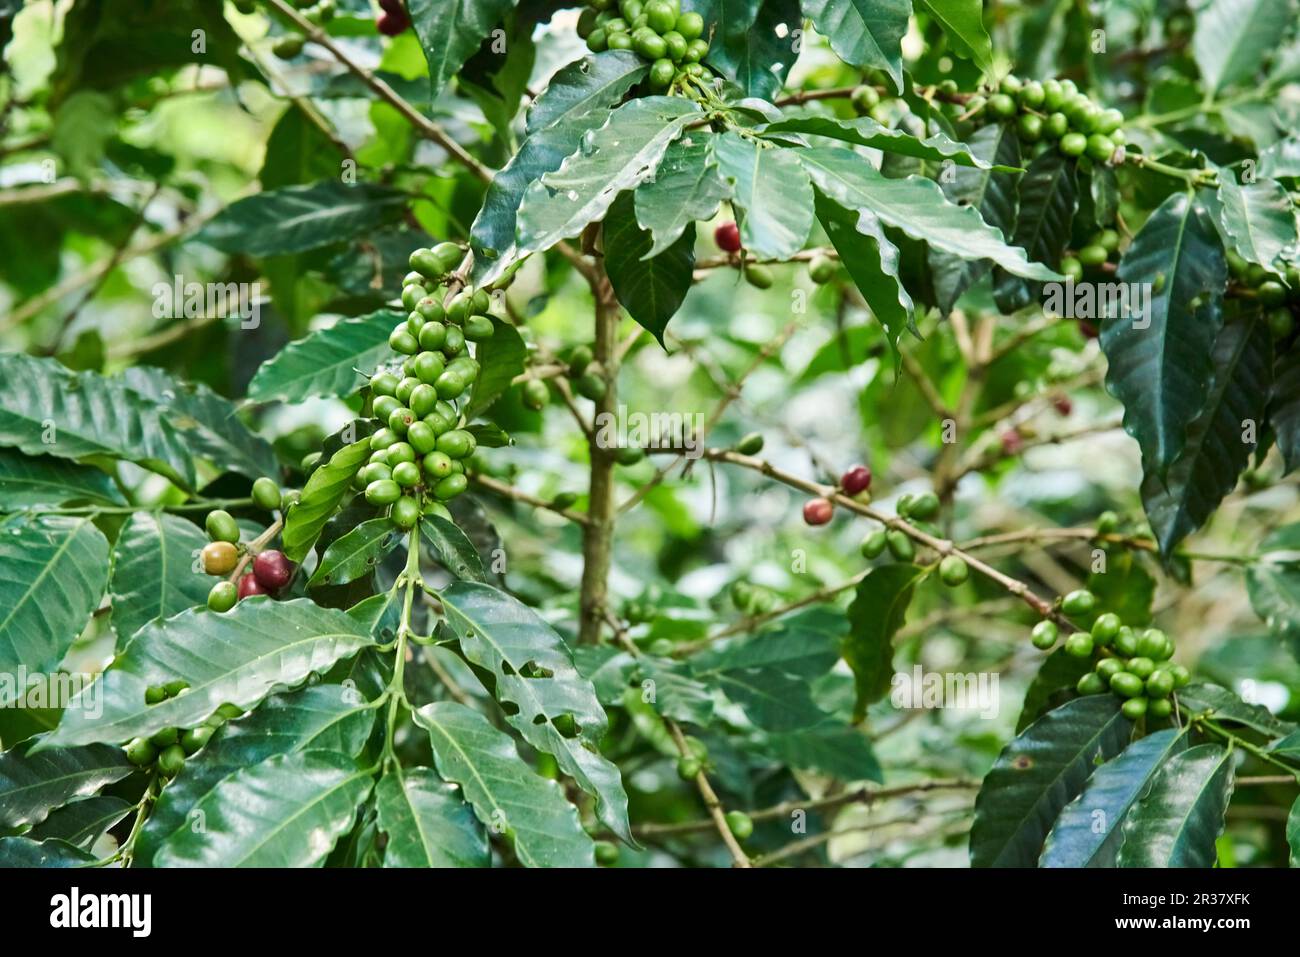 Coffee tree with many unripe coffee beans in its branches, in Santander, Colombia. Stock Photo